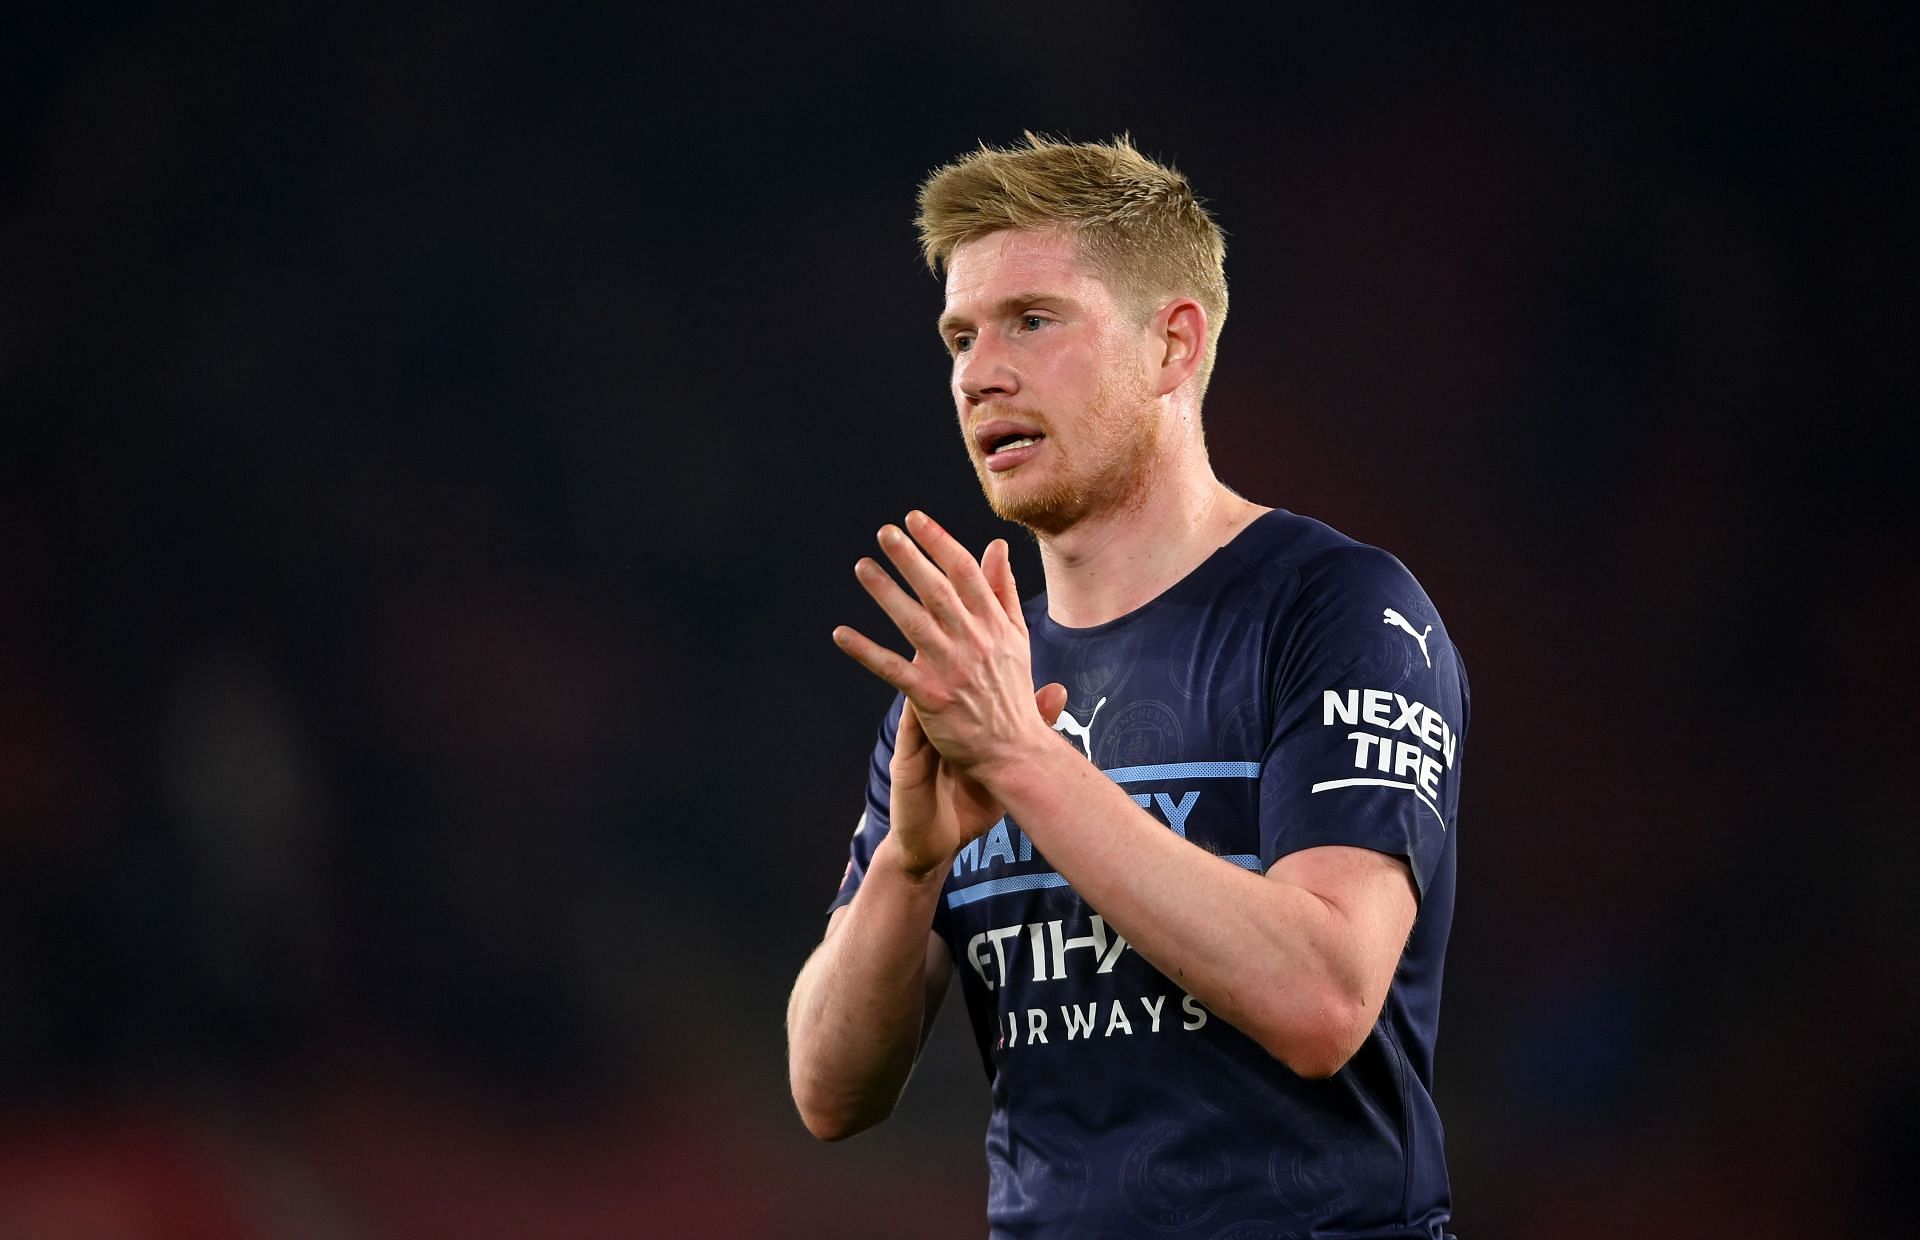 De Bruyne is slowly getting back to his usual form